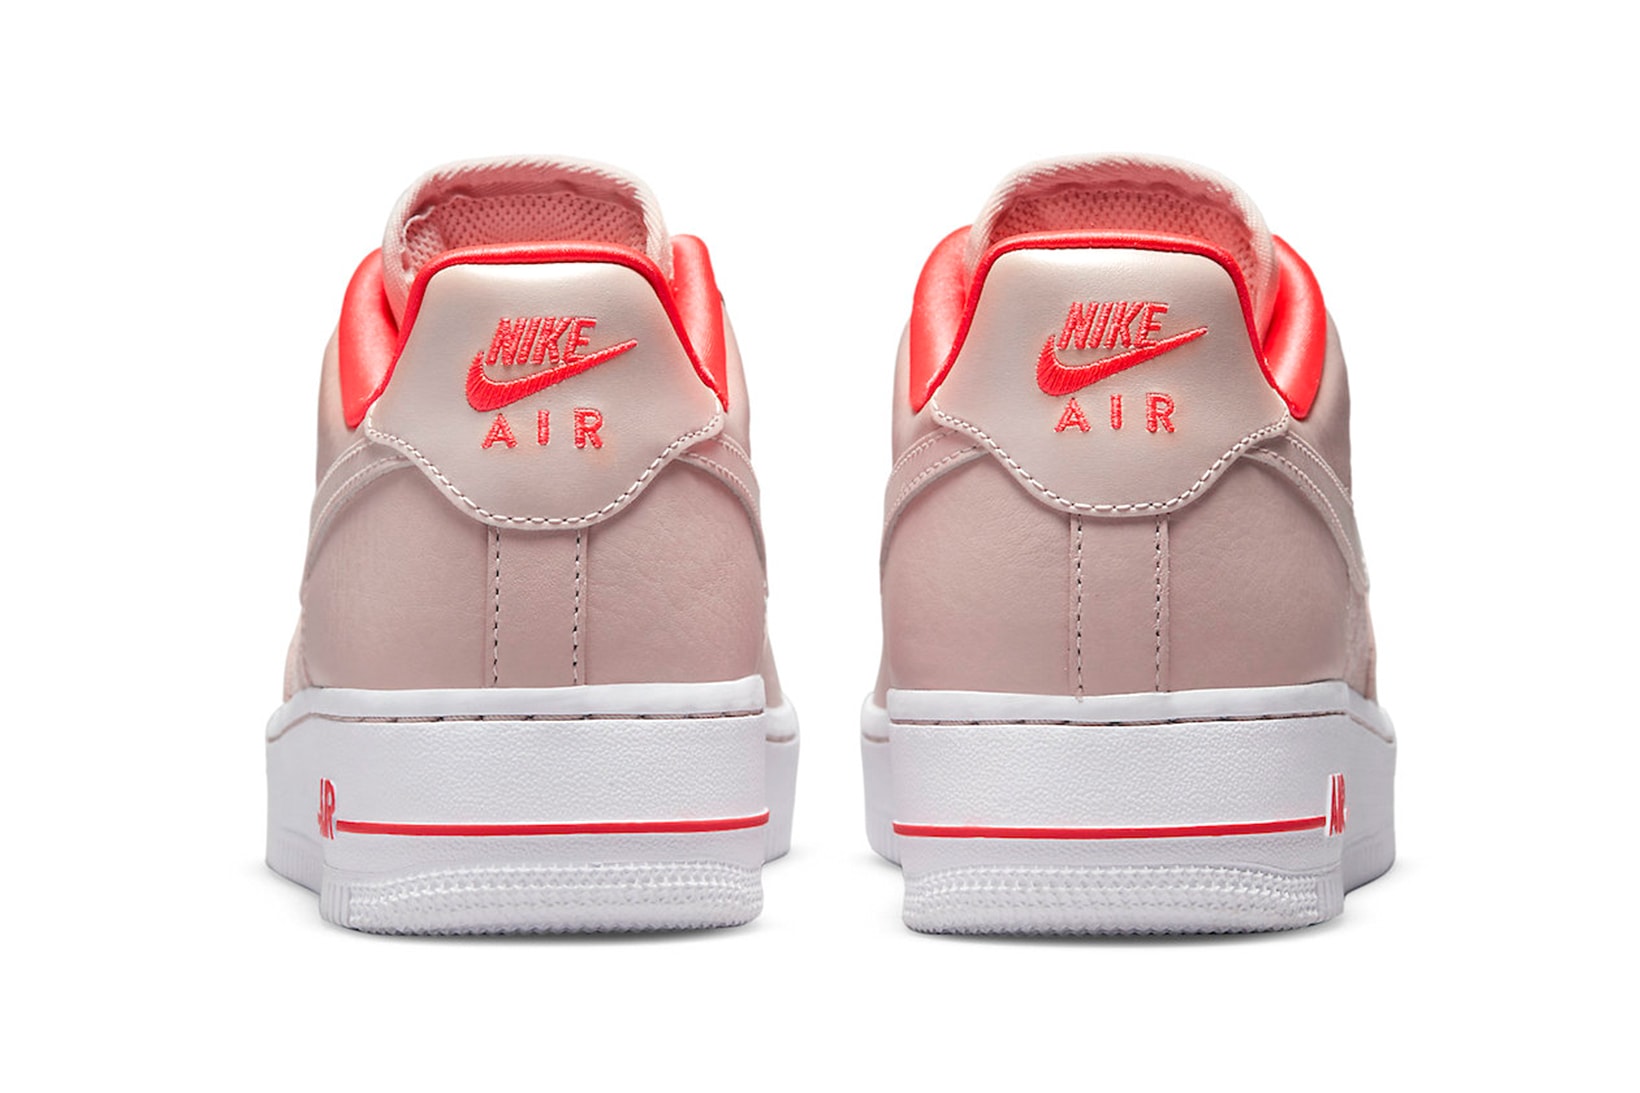 Nike Air Force 1 Low Satin Peach Beige Sneakers Release Info Posterior View